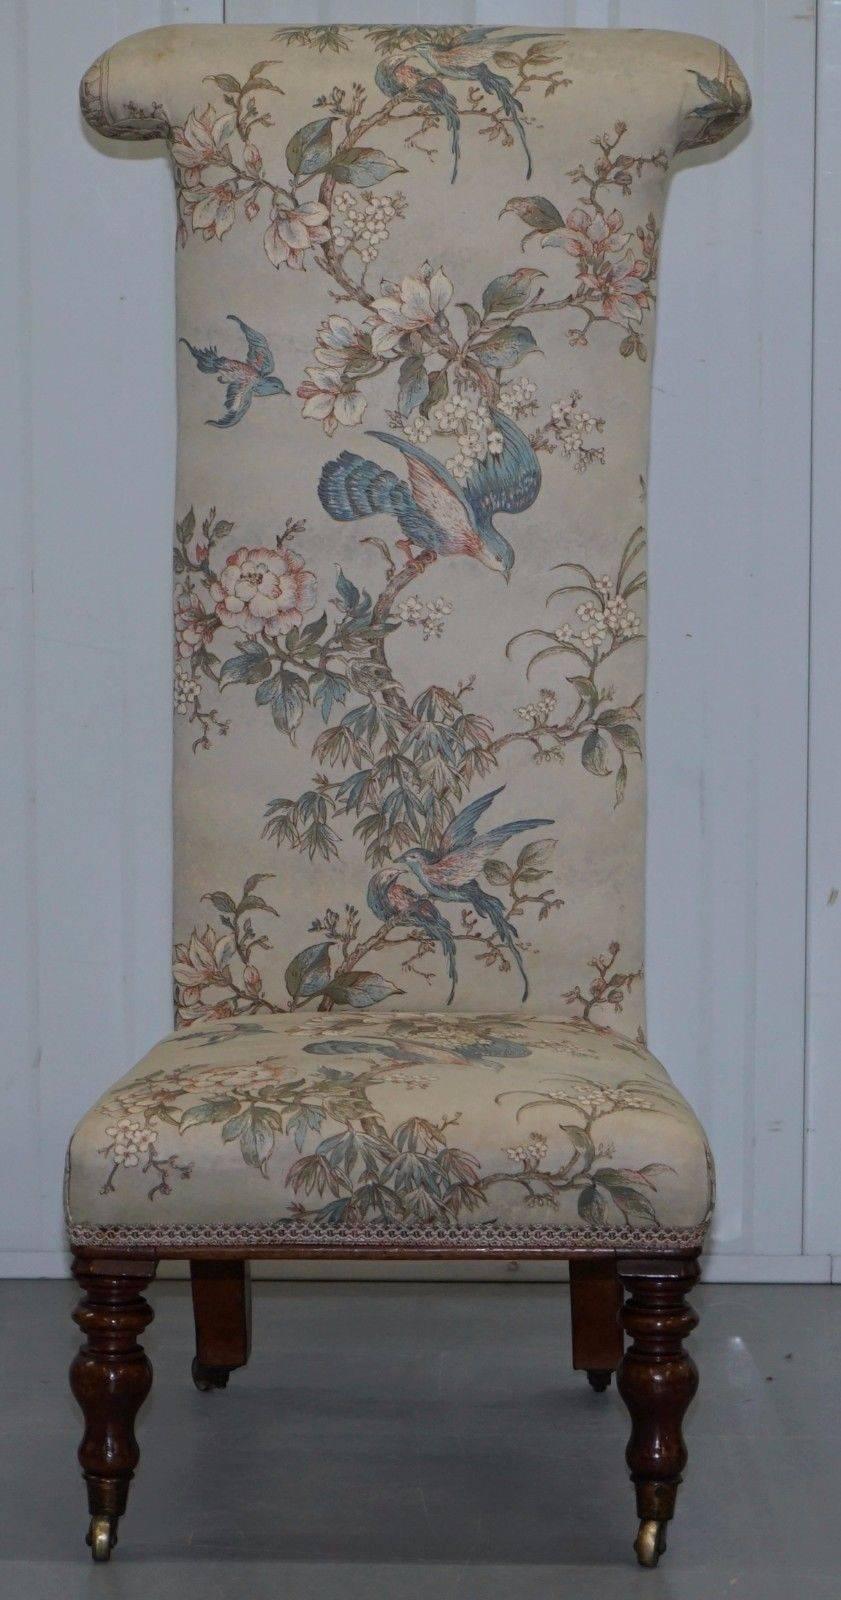 We are delighted to offer for sale this lovely Victorian Prayer chair with a mahogany frame and silk floral and bird detailed upholstery, part of a four piece suite

As mentioned this is part of a suite, I have this chair, then a larger Library